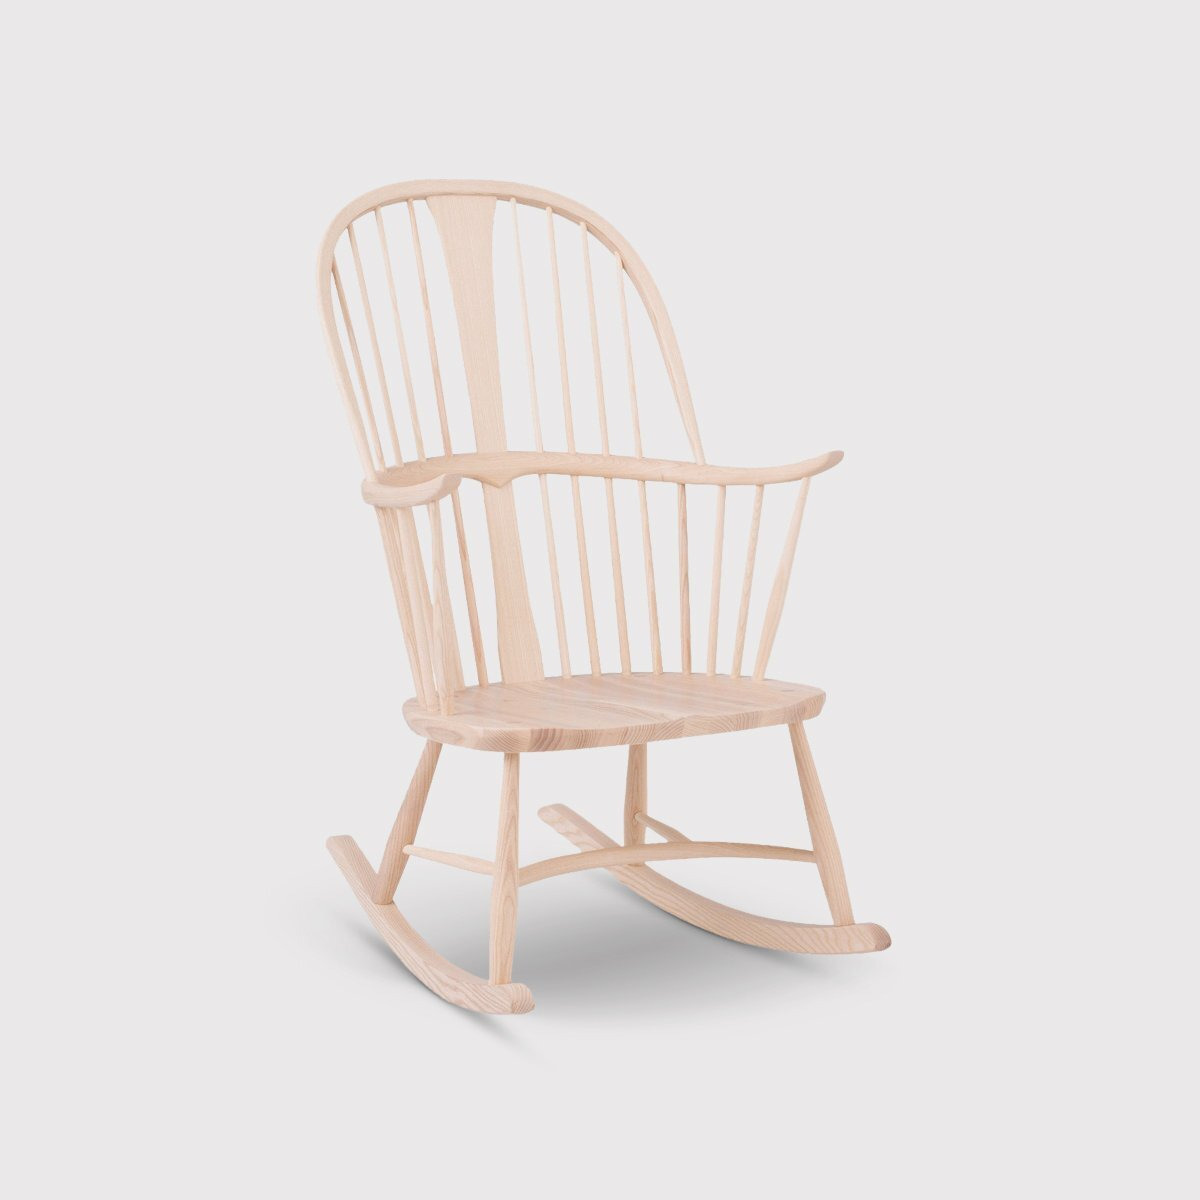 L.Ercolani Chairmakers Rocking Chair, Neutral Wood - Barker & Stonehouse - image 1